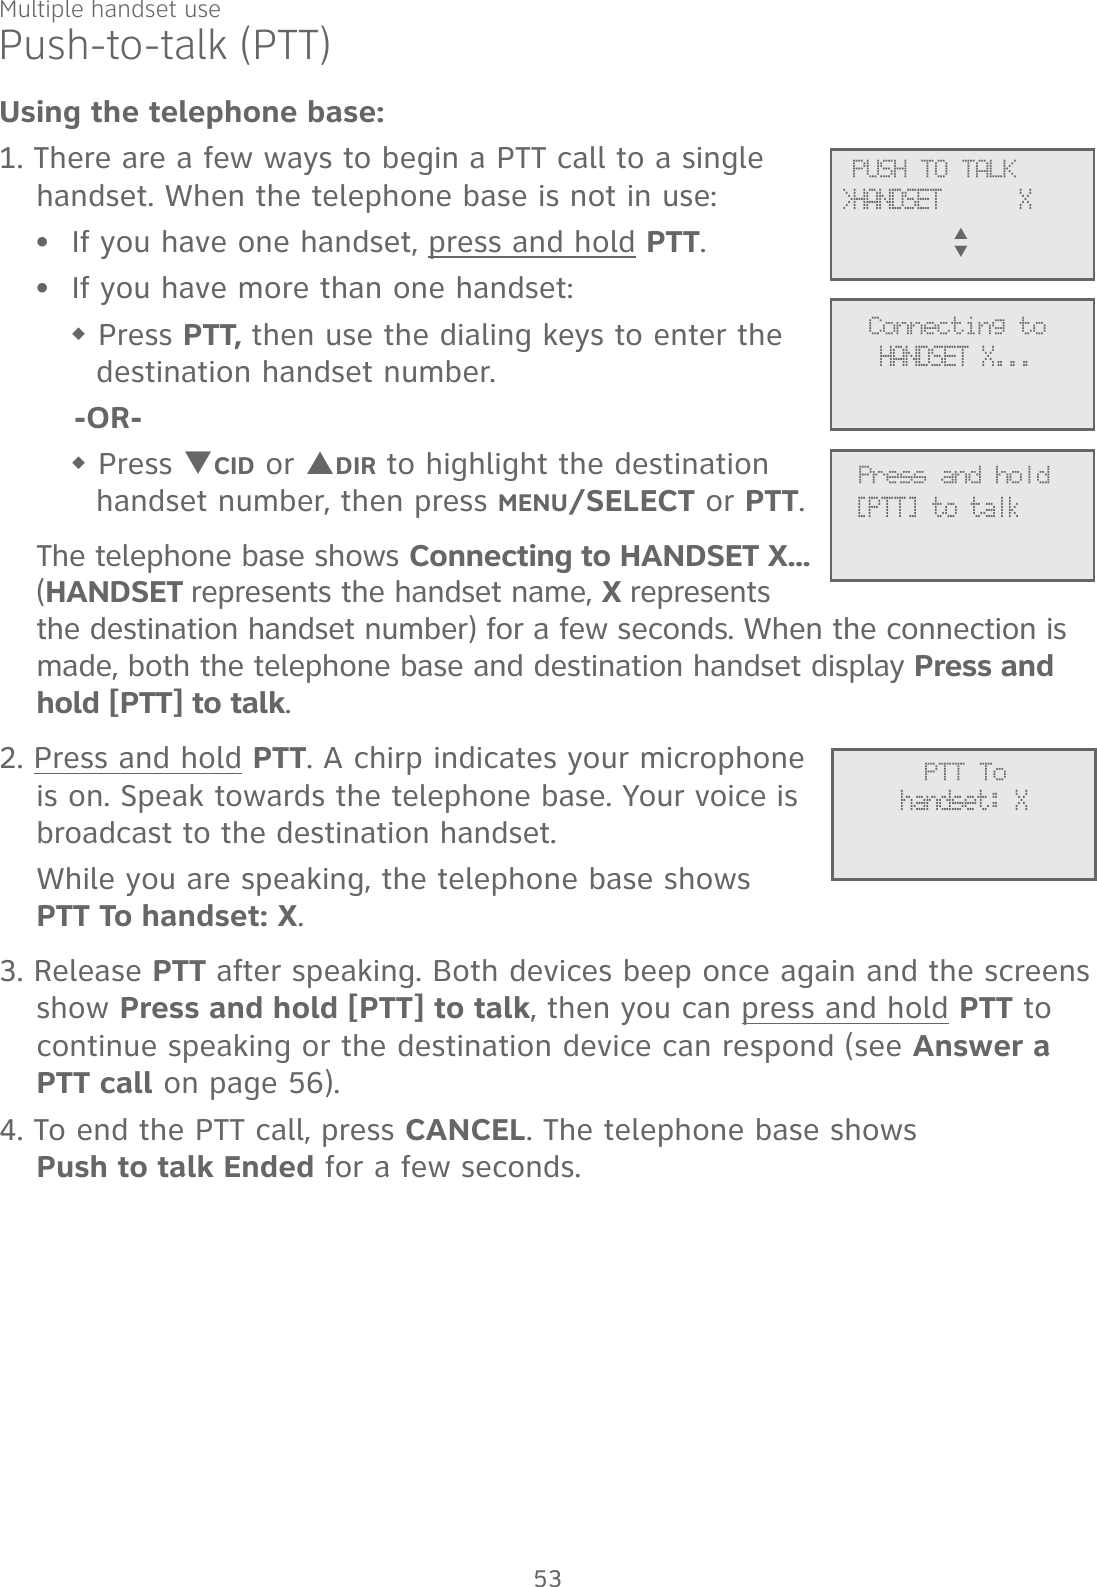 Multiple handset usePush-to-talk (PTT)Using the telephone base:1. There are a few ways to begin a PTT call to a single handset. When the telephone base is not in use:If you have one handset, press and hold PTT.If you have more than one handset: Press PTT, then use the dialing keys to enter the destination handset number. -OR- Press TCID or SDIR to highlight the destination handset number, then press MENU/SELECT or PTT.The telephone base shows Connecting to HANDSET X... (HANDSET represents the handset name, X represents the destination handset number) for a few seconds. When the connection is made, both the telephone base and destination handset display Press and hold [PTT] to talk. 2. Press and hold PTT. A chirp indicates your microphone is on. Speak towards the telephone base. Your voice is broadcast to the destination handset.While you are speaking, the telephone base shows  PTT To handset: X.3. Release PTT after speaking. Both devices beep once again and the screens show Press and hold [PTT] to talk, then you can press and hold PTT to continue speaking or the destination device can respond (see Answer a PTT call on page 56).4. To end the PTT call, press CANCEL. The telephone base shows  Push to talk Ended for a few seconds.••             PTT Tohandset: X             PUSH TO TALK&gt;HANDSET      XS      T             Connecting toHANDSET X...             Press and hold[PTT] to talk53